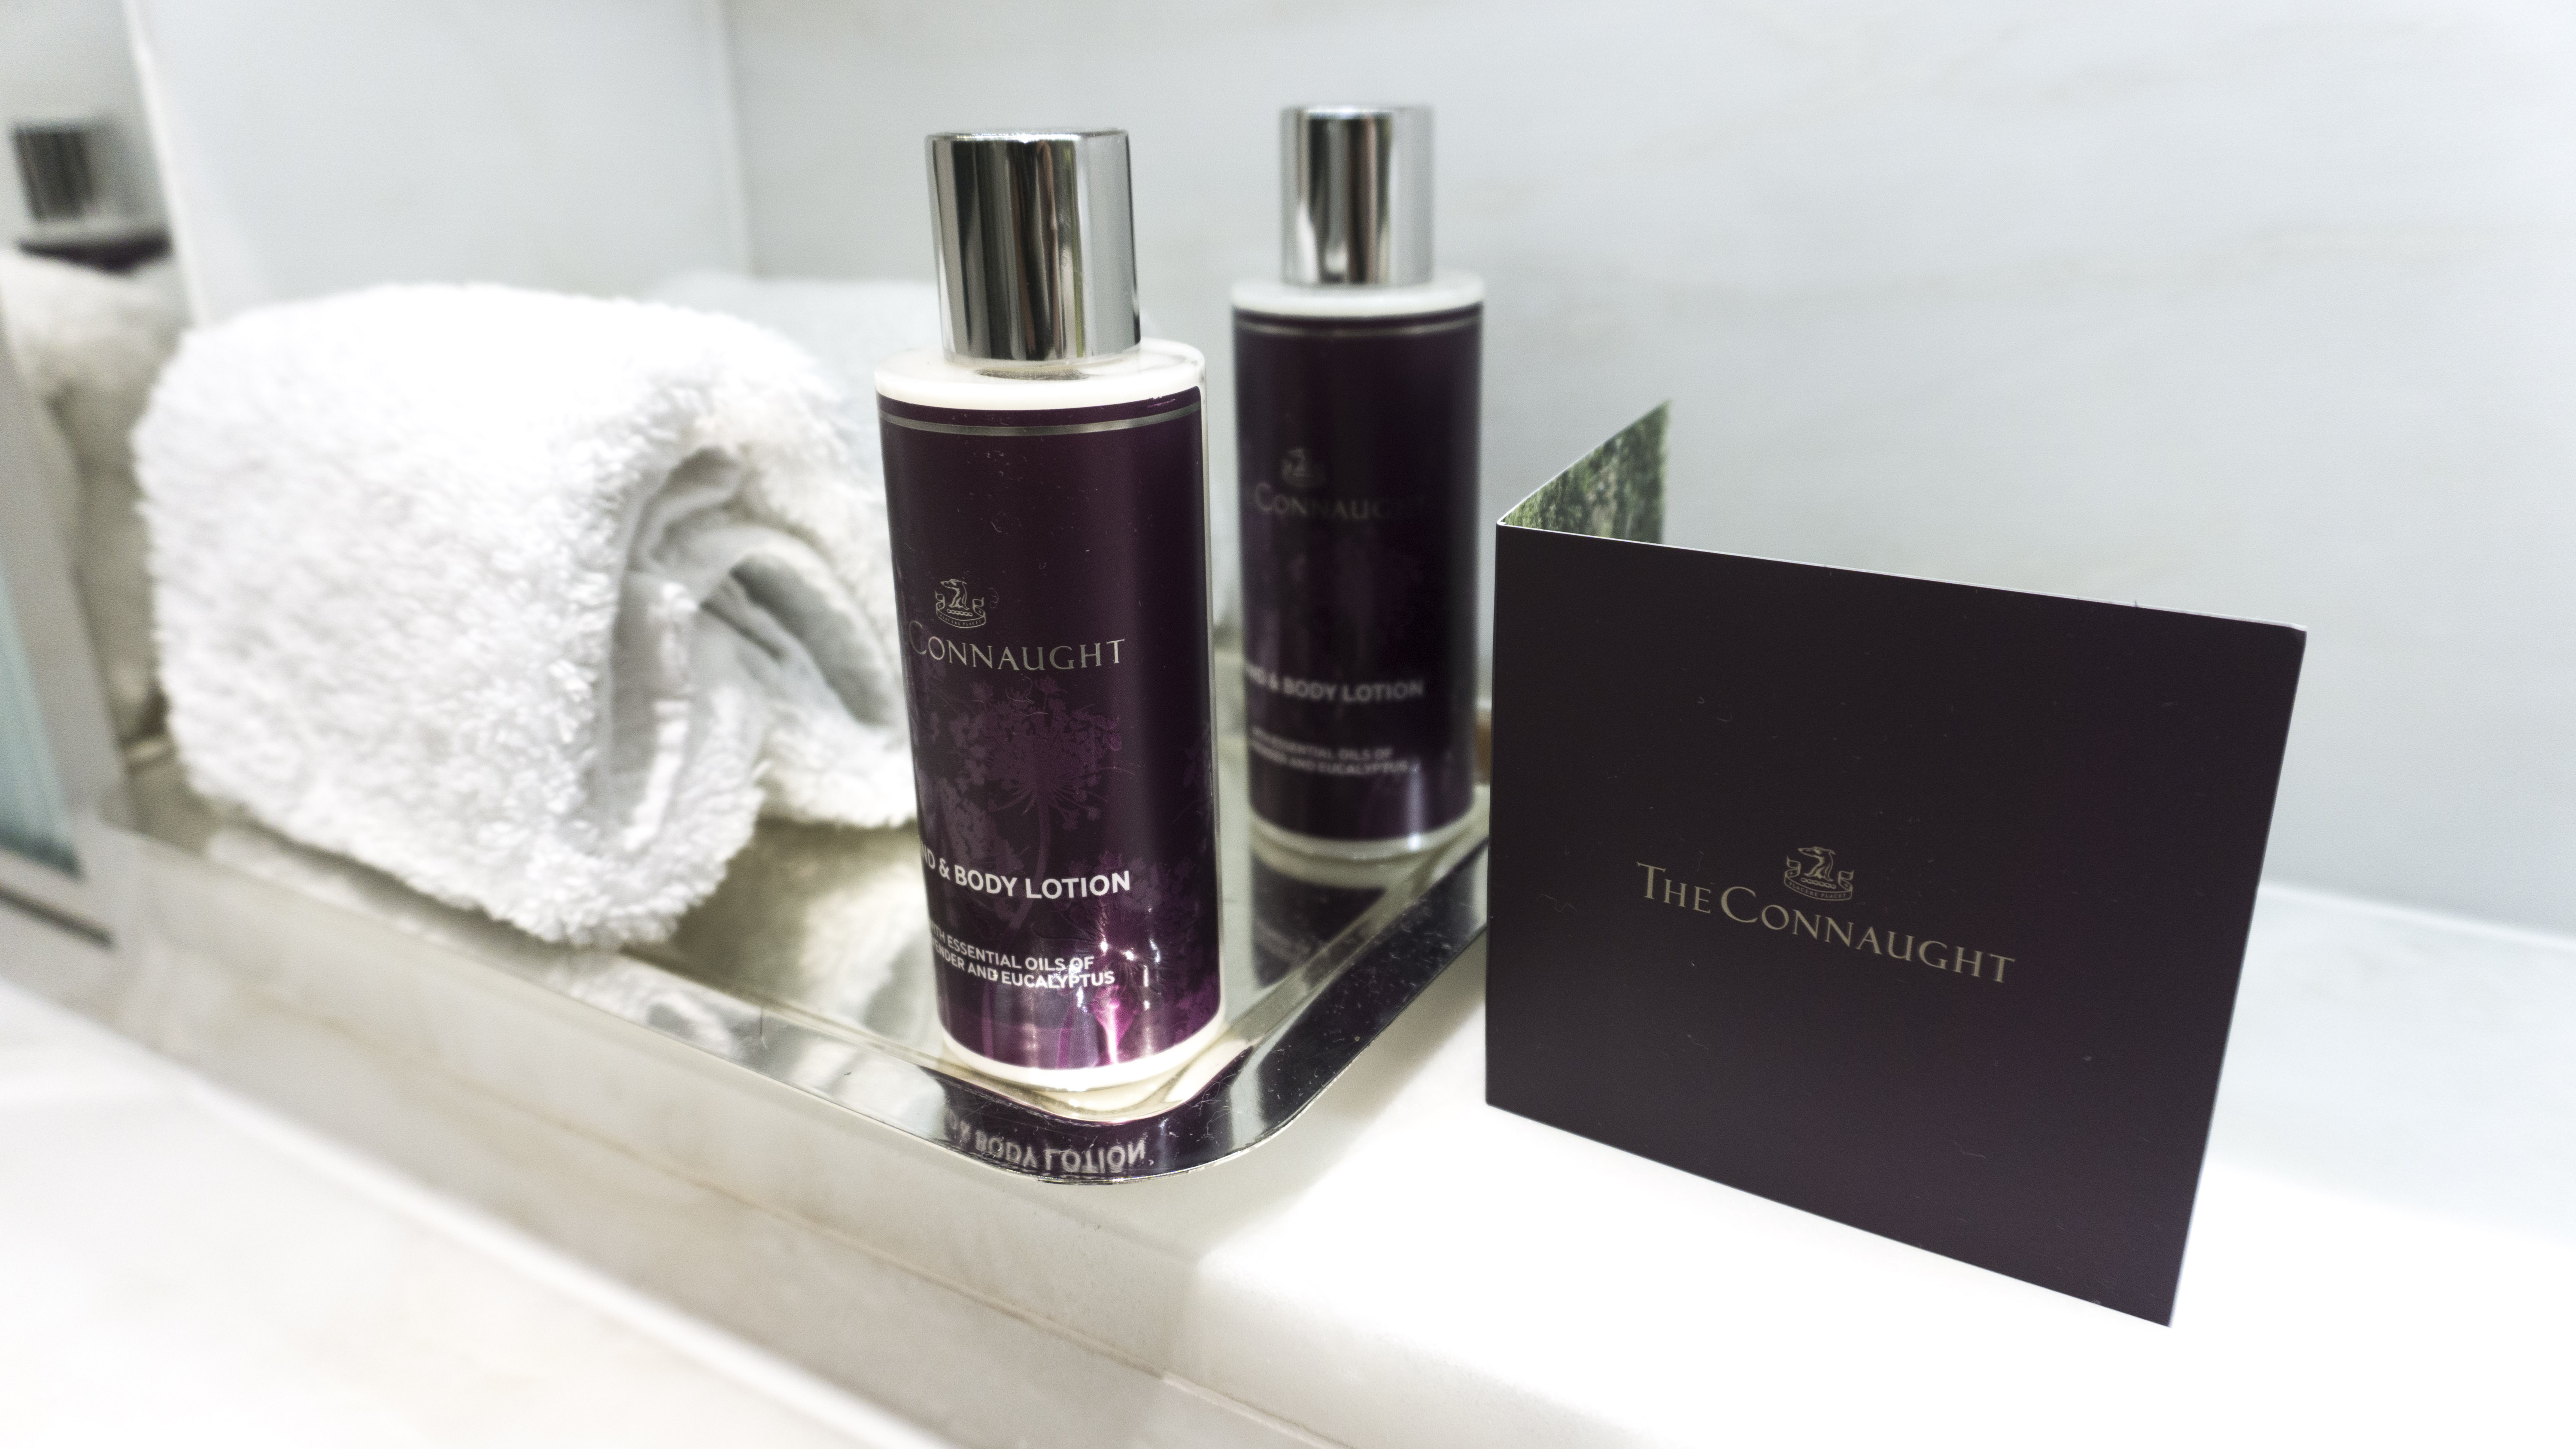 Bathroom amenities at the Connaught hotel 